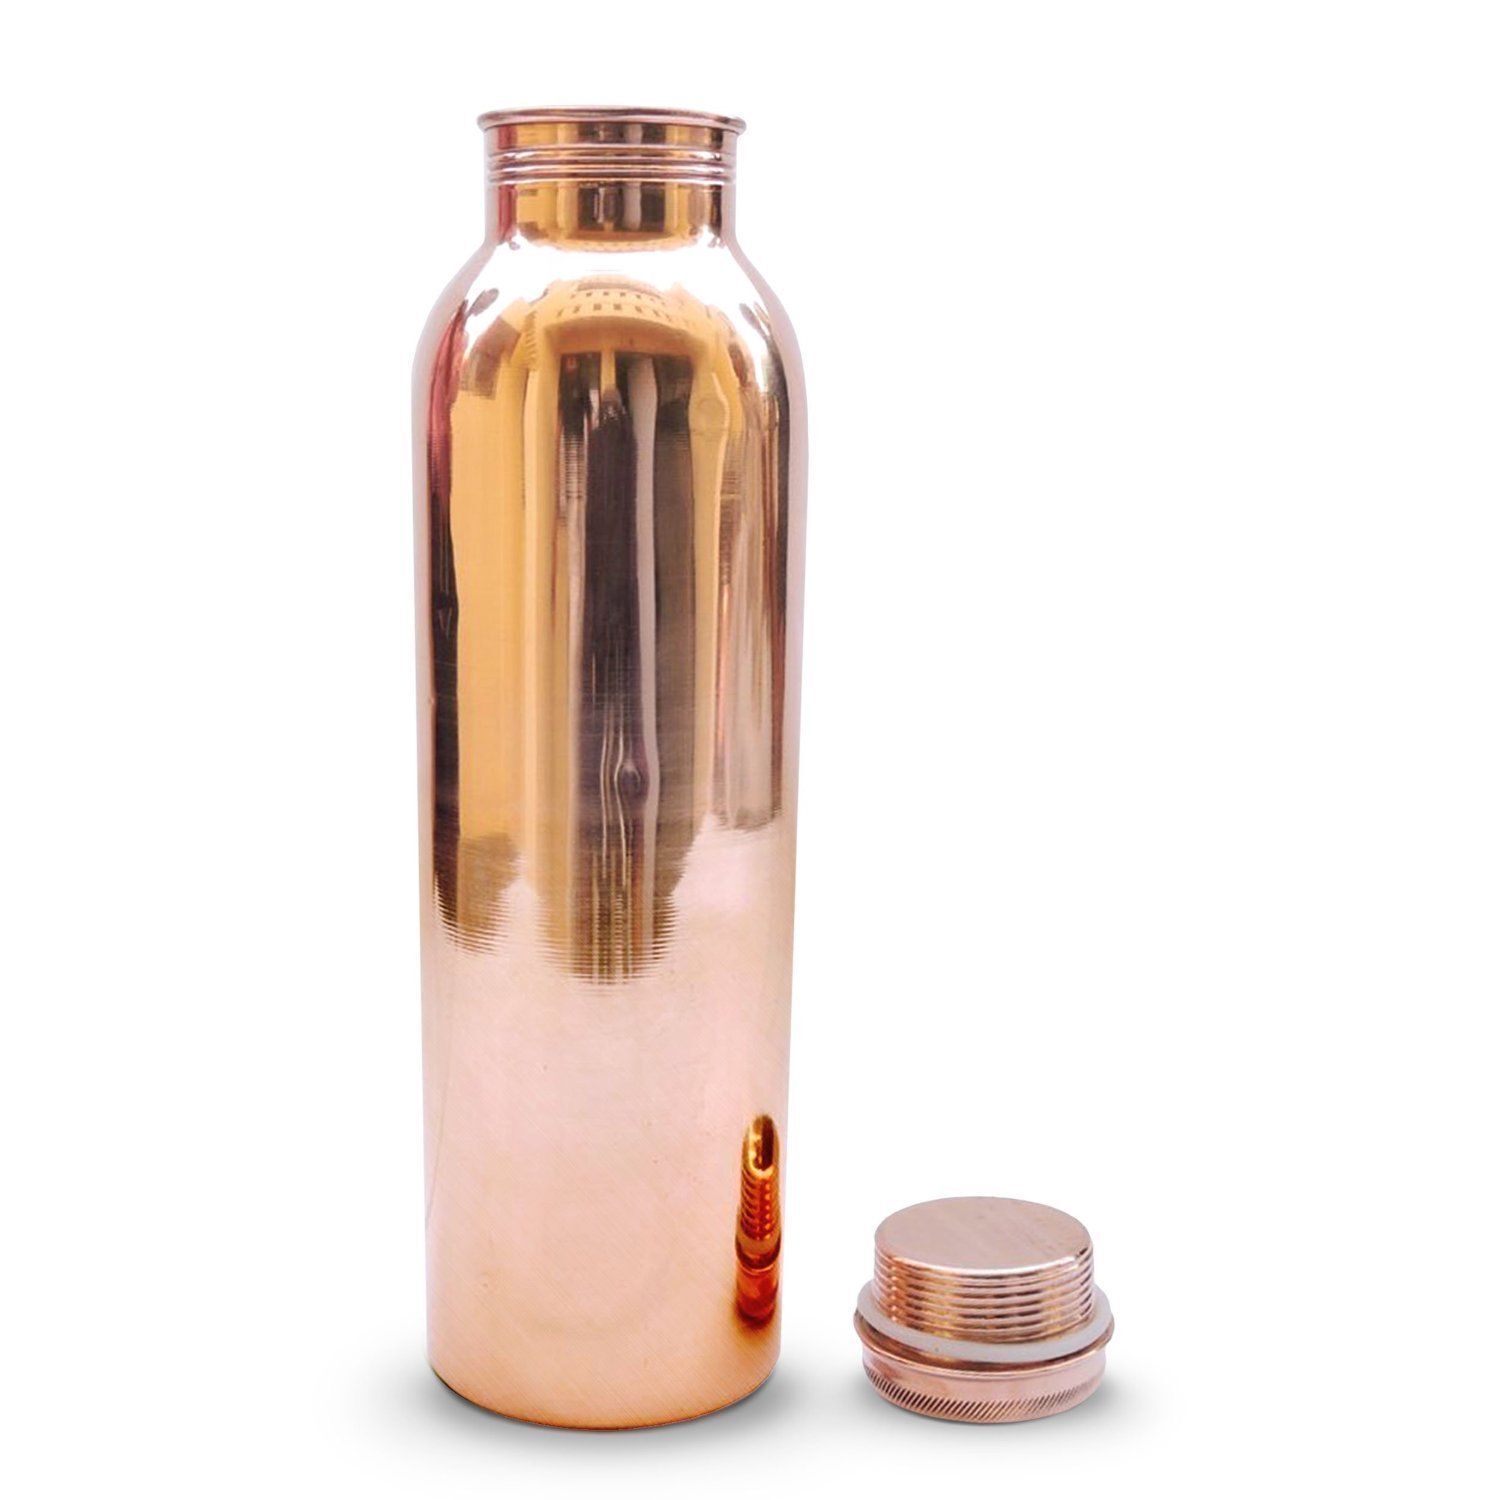 100% Pure Copper Water Bottle For Yoga Ayurveda Health Benefits 950 ml Copper Без бренда